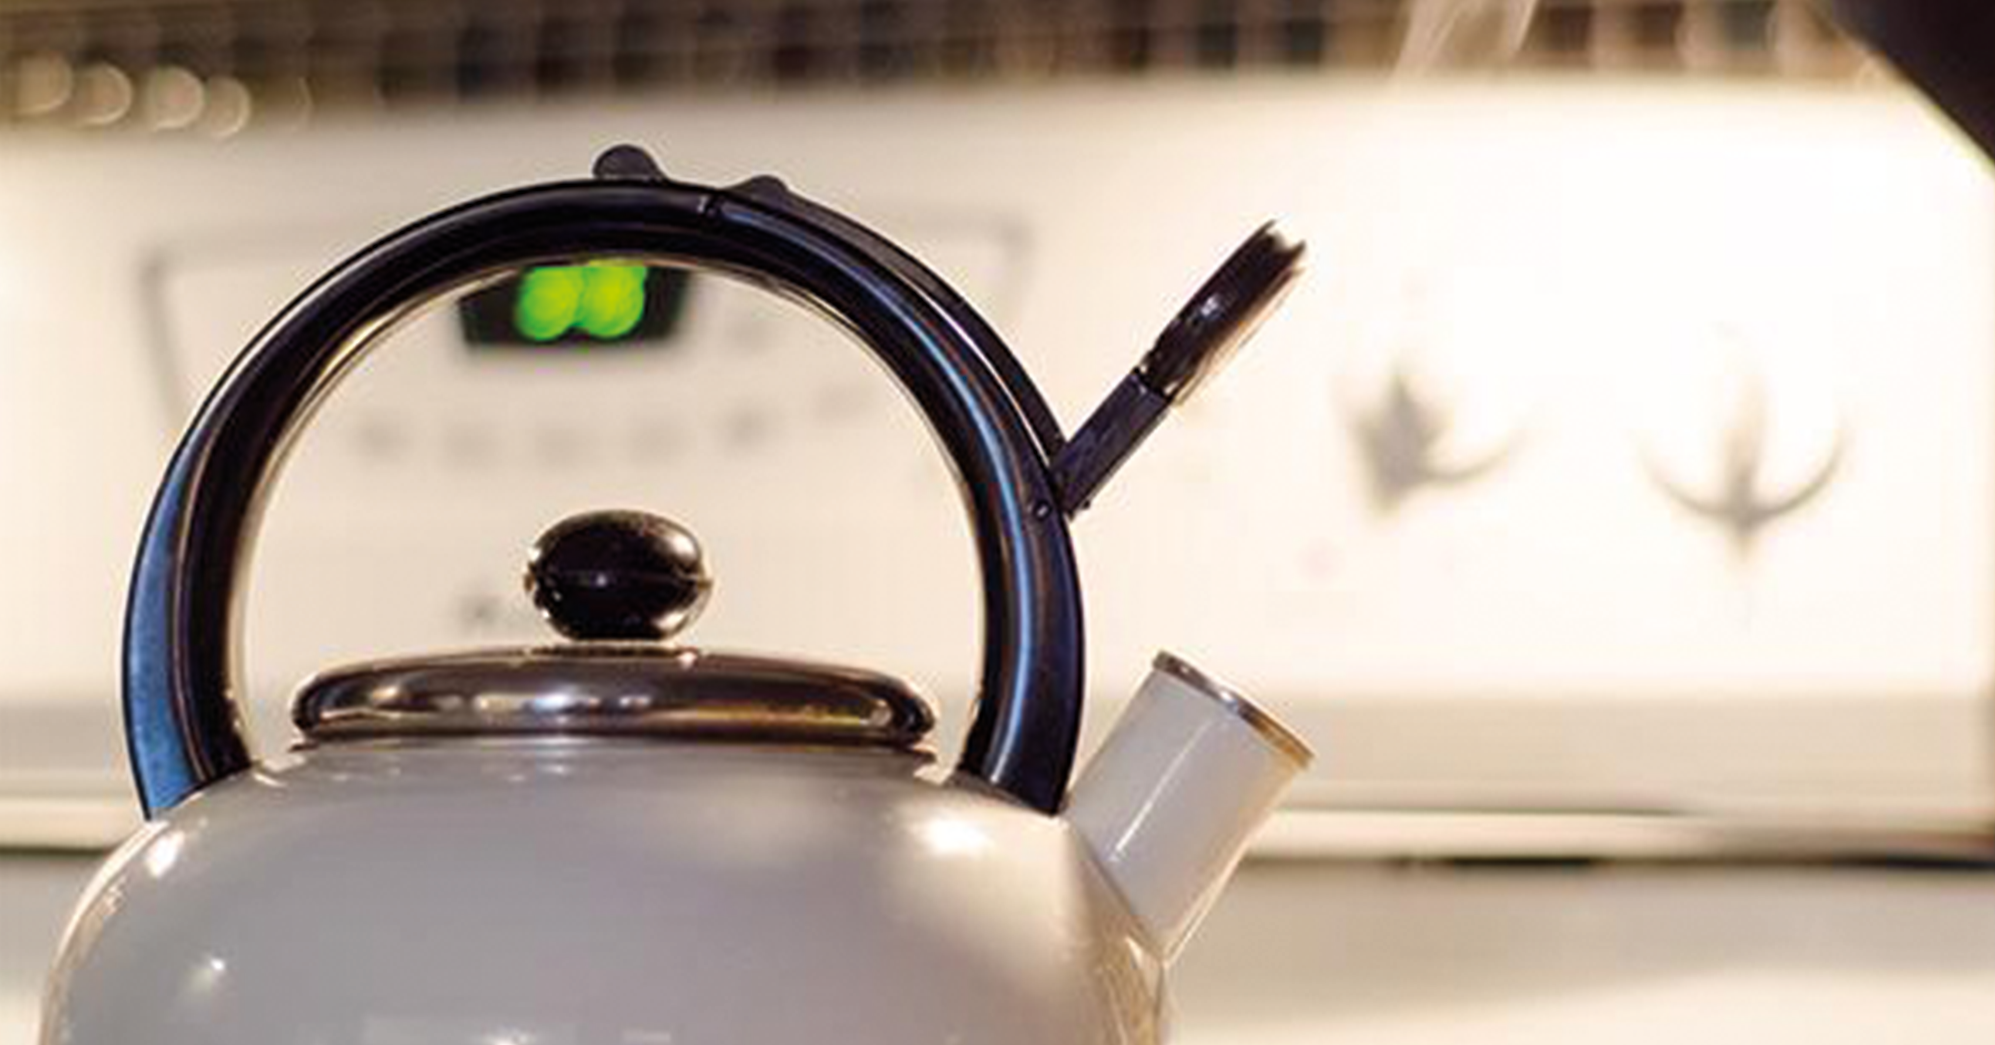 Kettle Time! Life hack some fitness into your day